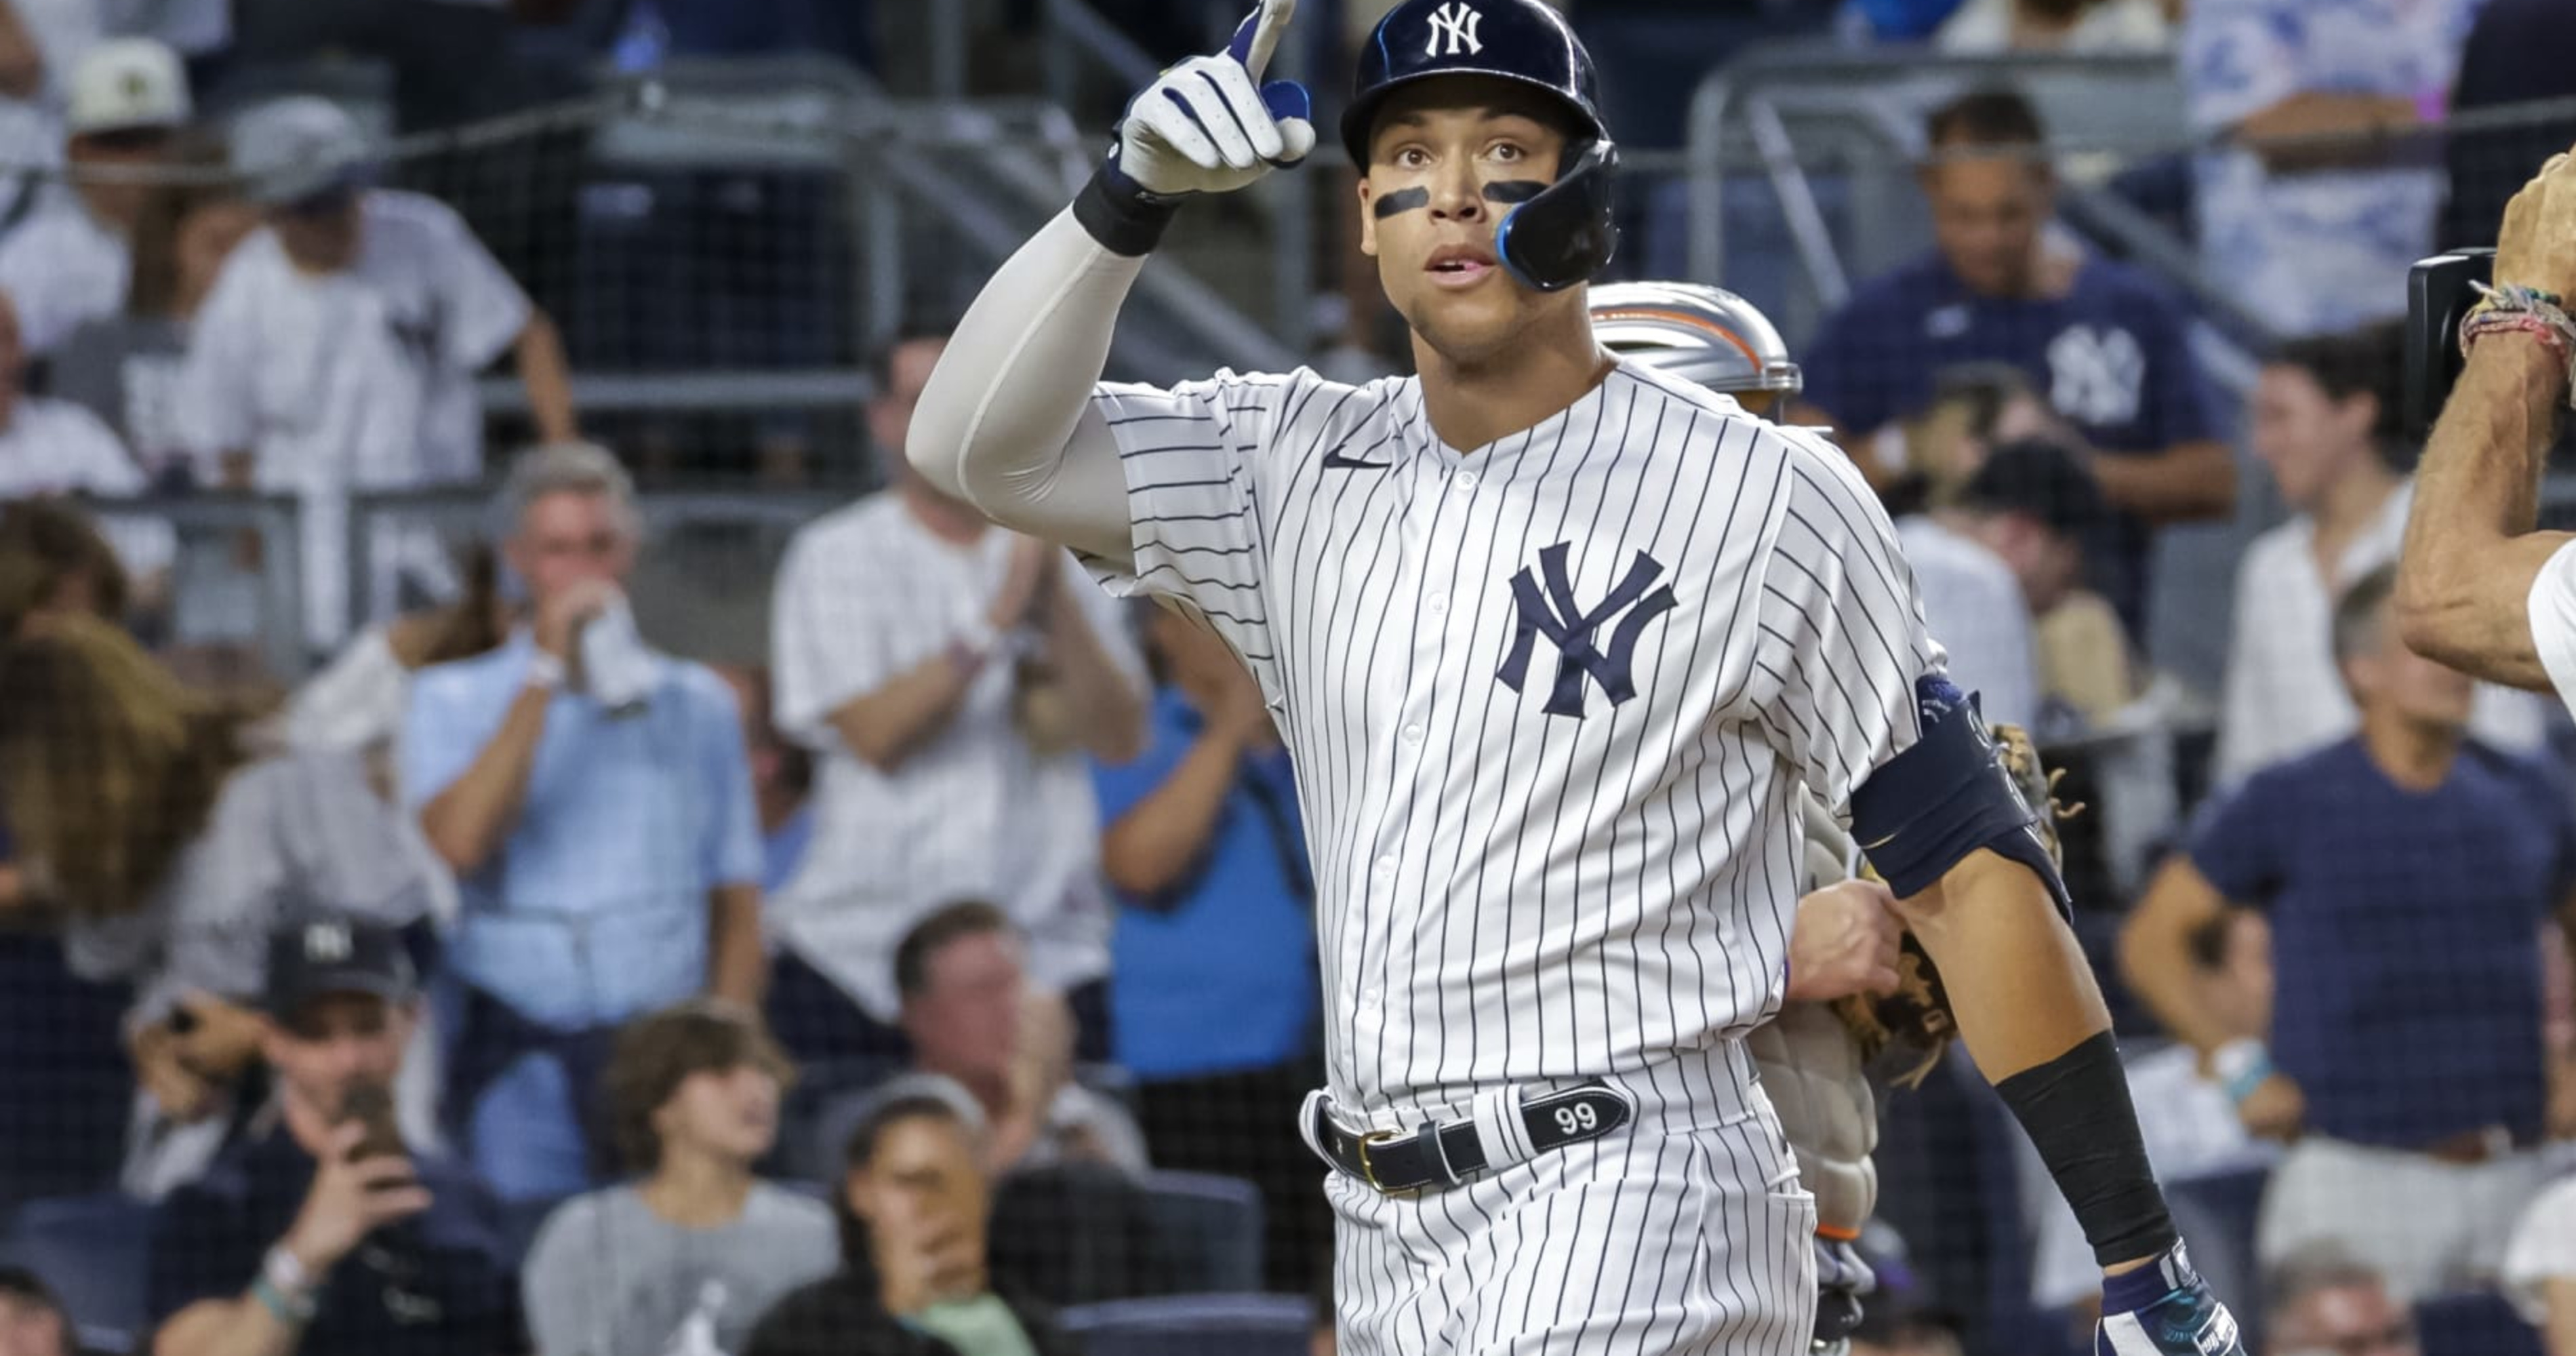 All Rise: Yankees' Aaron Judge Bet On Himself and It's Paying Off